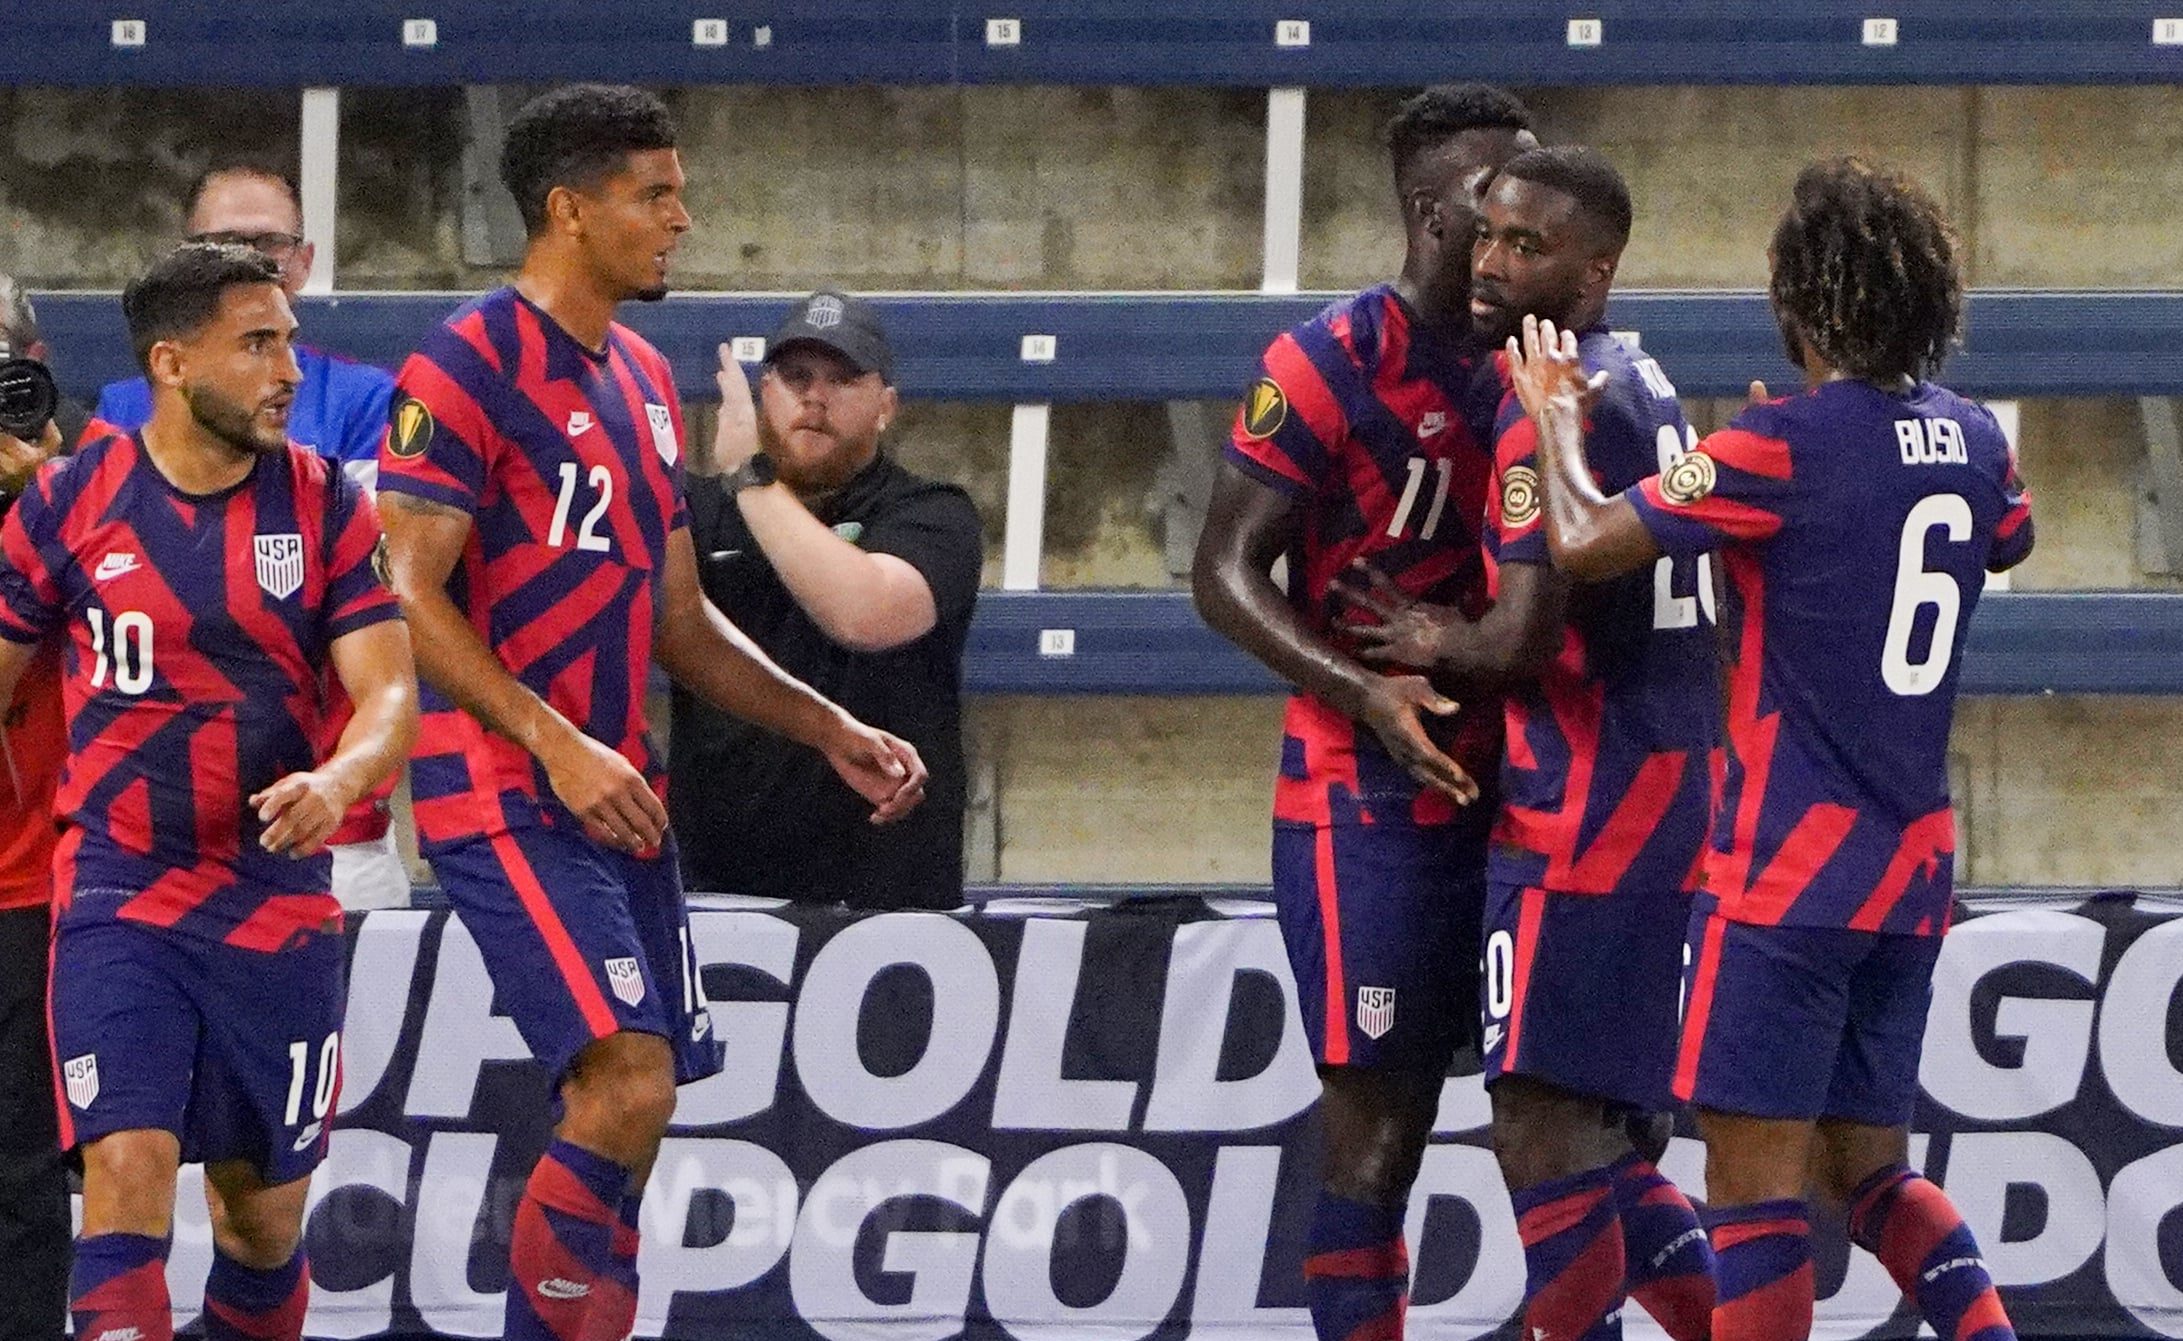 United States forward Daryl Dike (11) celebrates with team mates after scoring a goal against Martinique during CONCACAF Gold Cup Soccer group stage play at Children's Mercy Park.